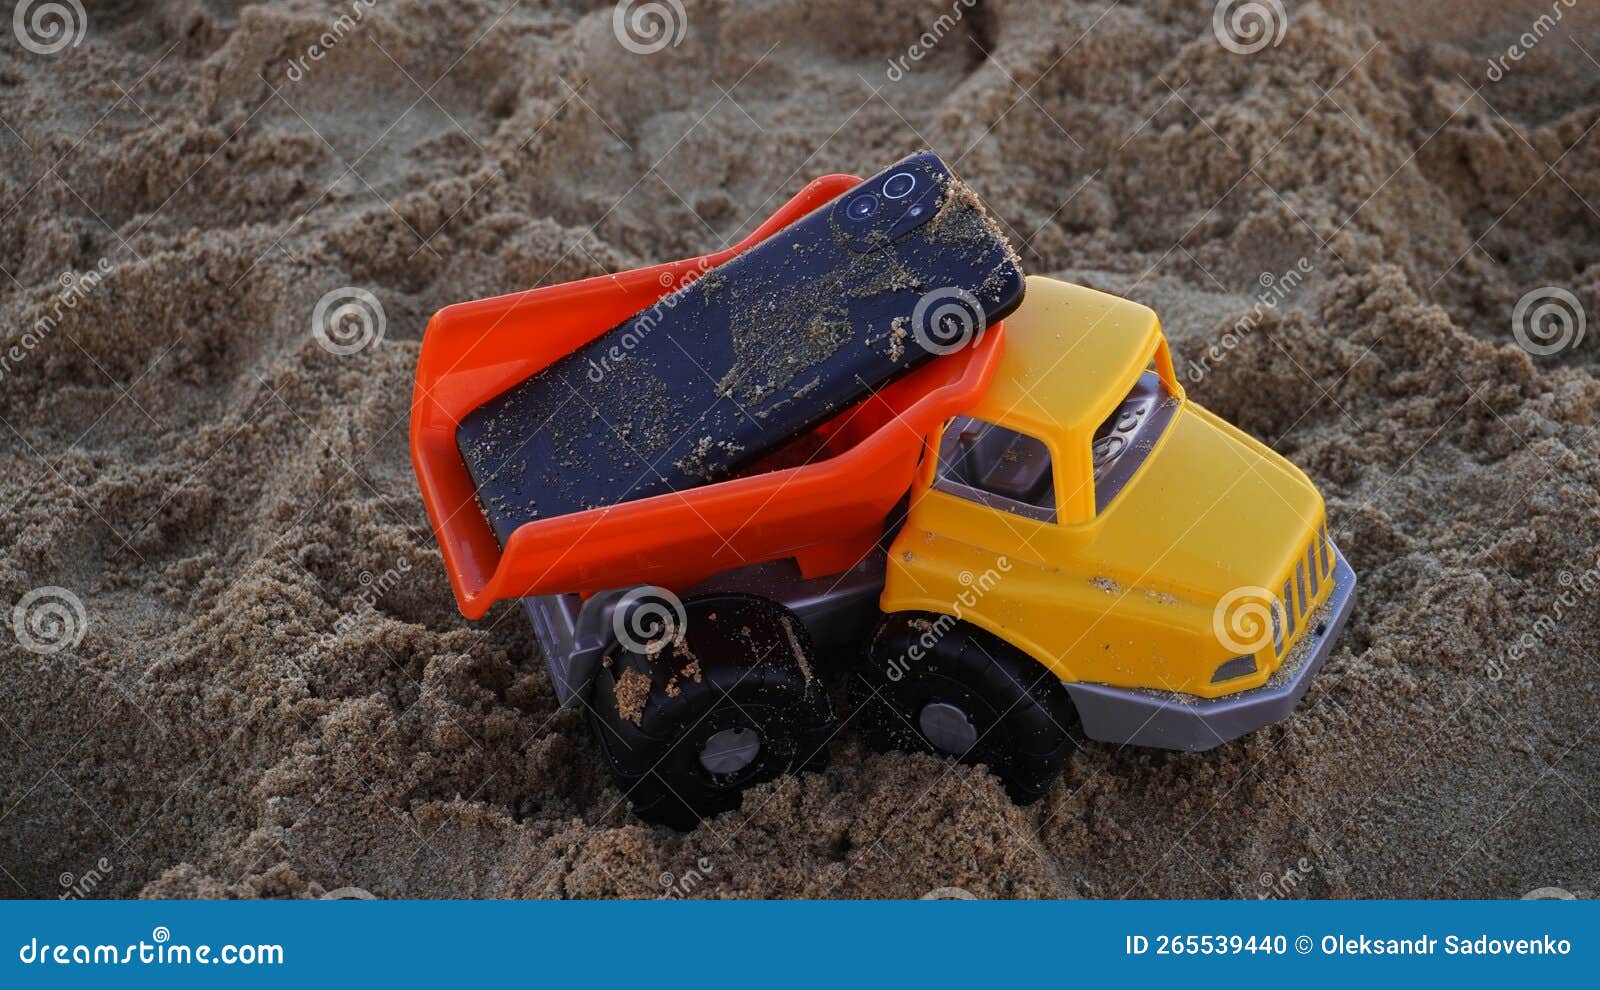 i grew up playing with the phone in the sand